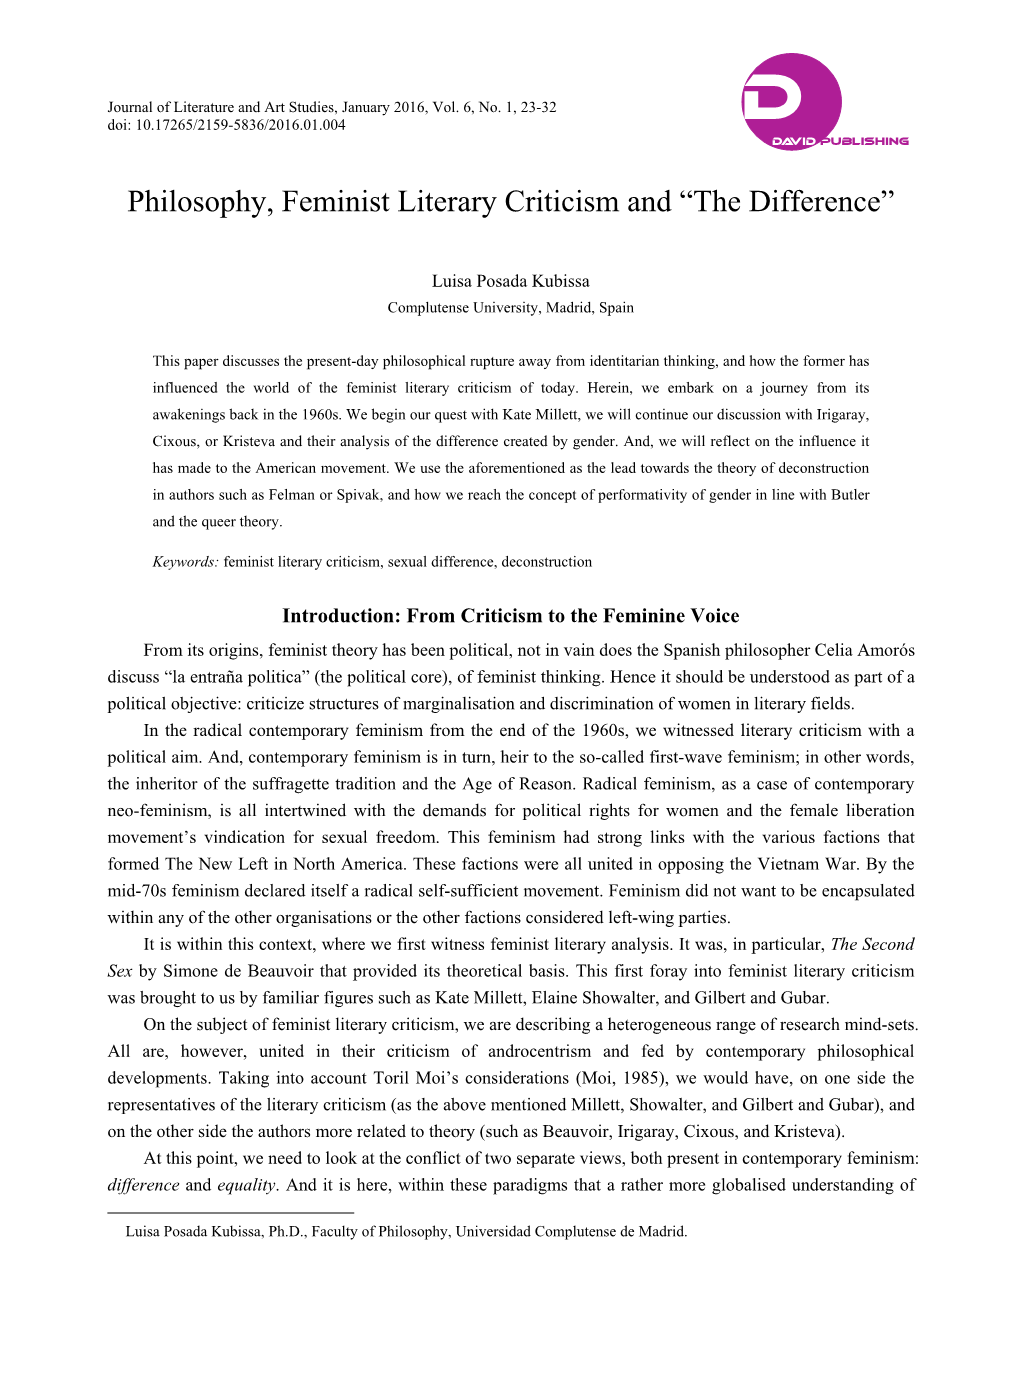 Philosophy, Feminist Literary Criticism and “The Difference”